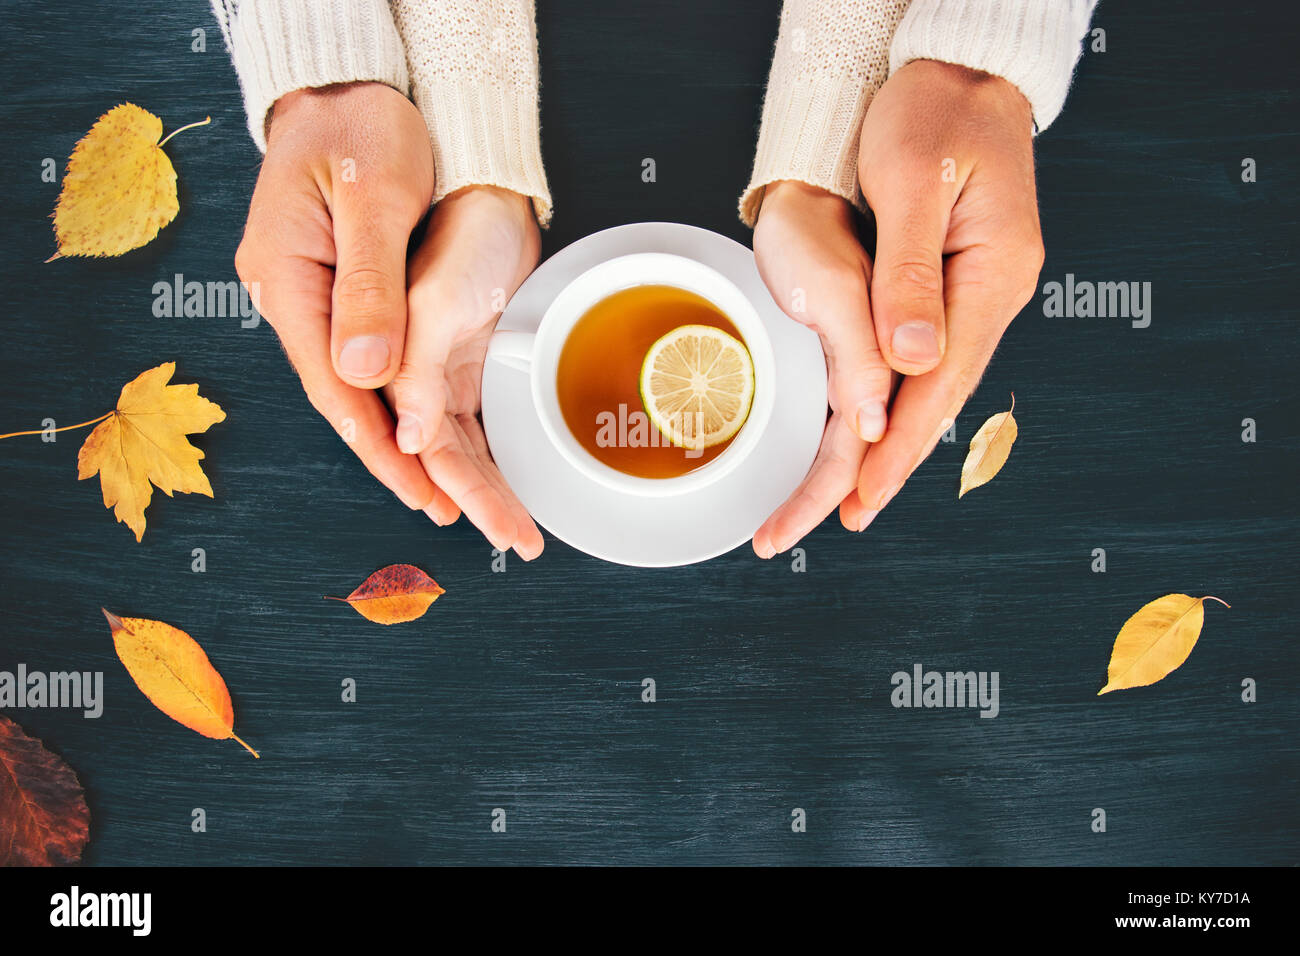 Couple Man and Woman in Love hugging holding hands with hot tea lemon cup on wooden table with autumn leaves Romantic relationship feelings concept to Stock Photo